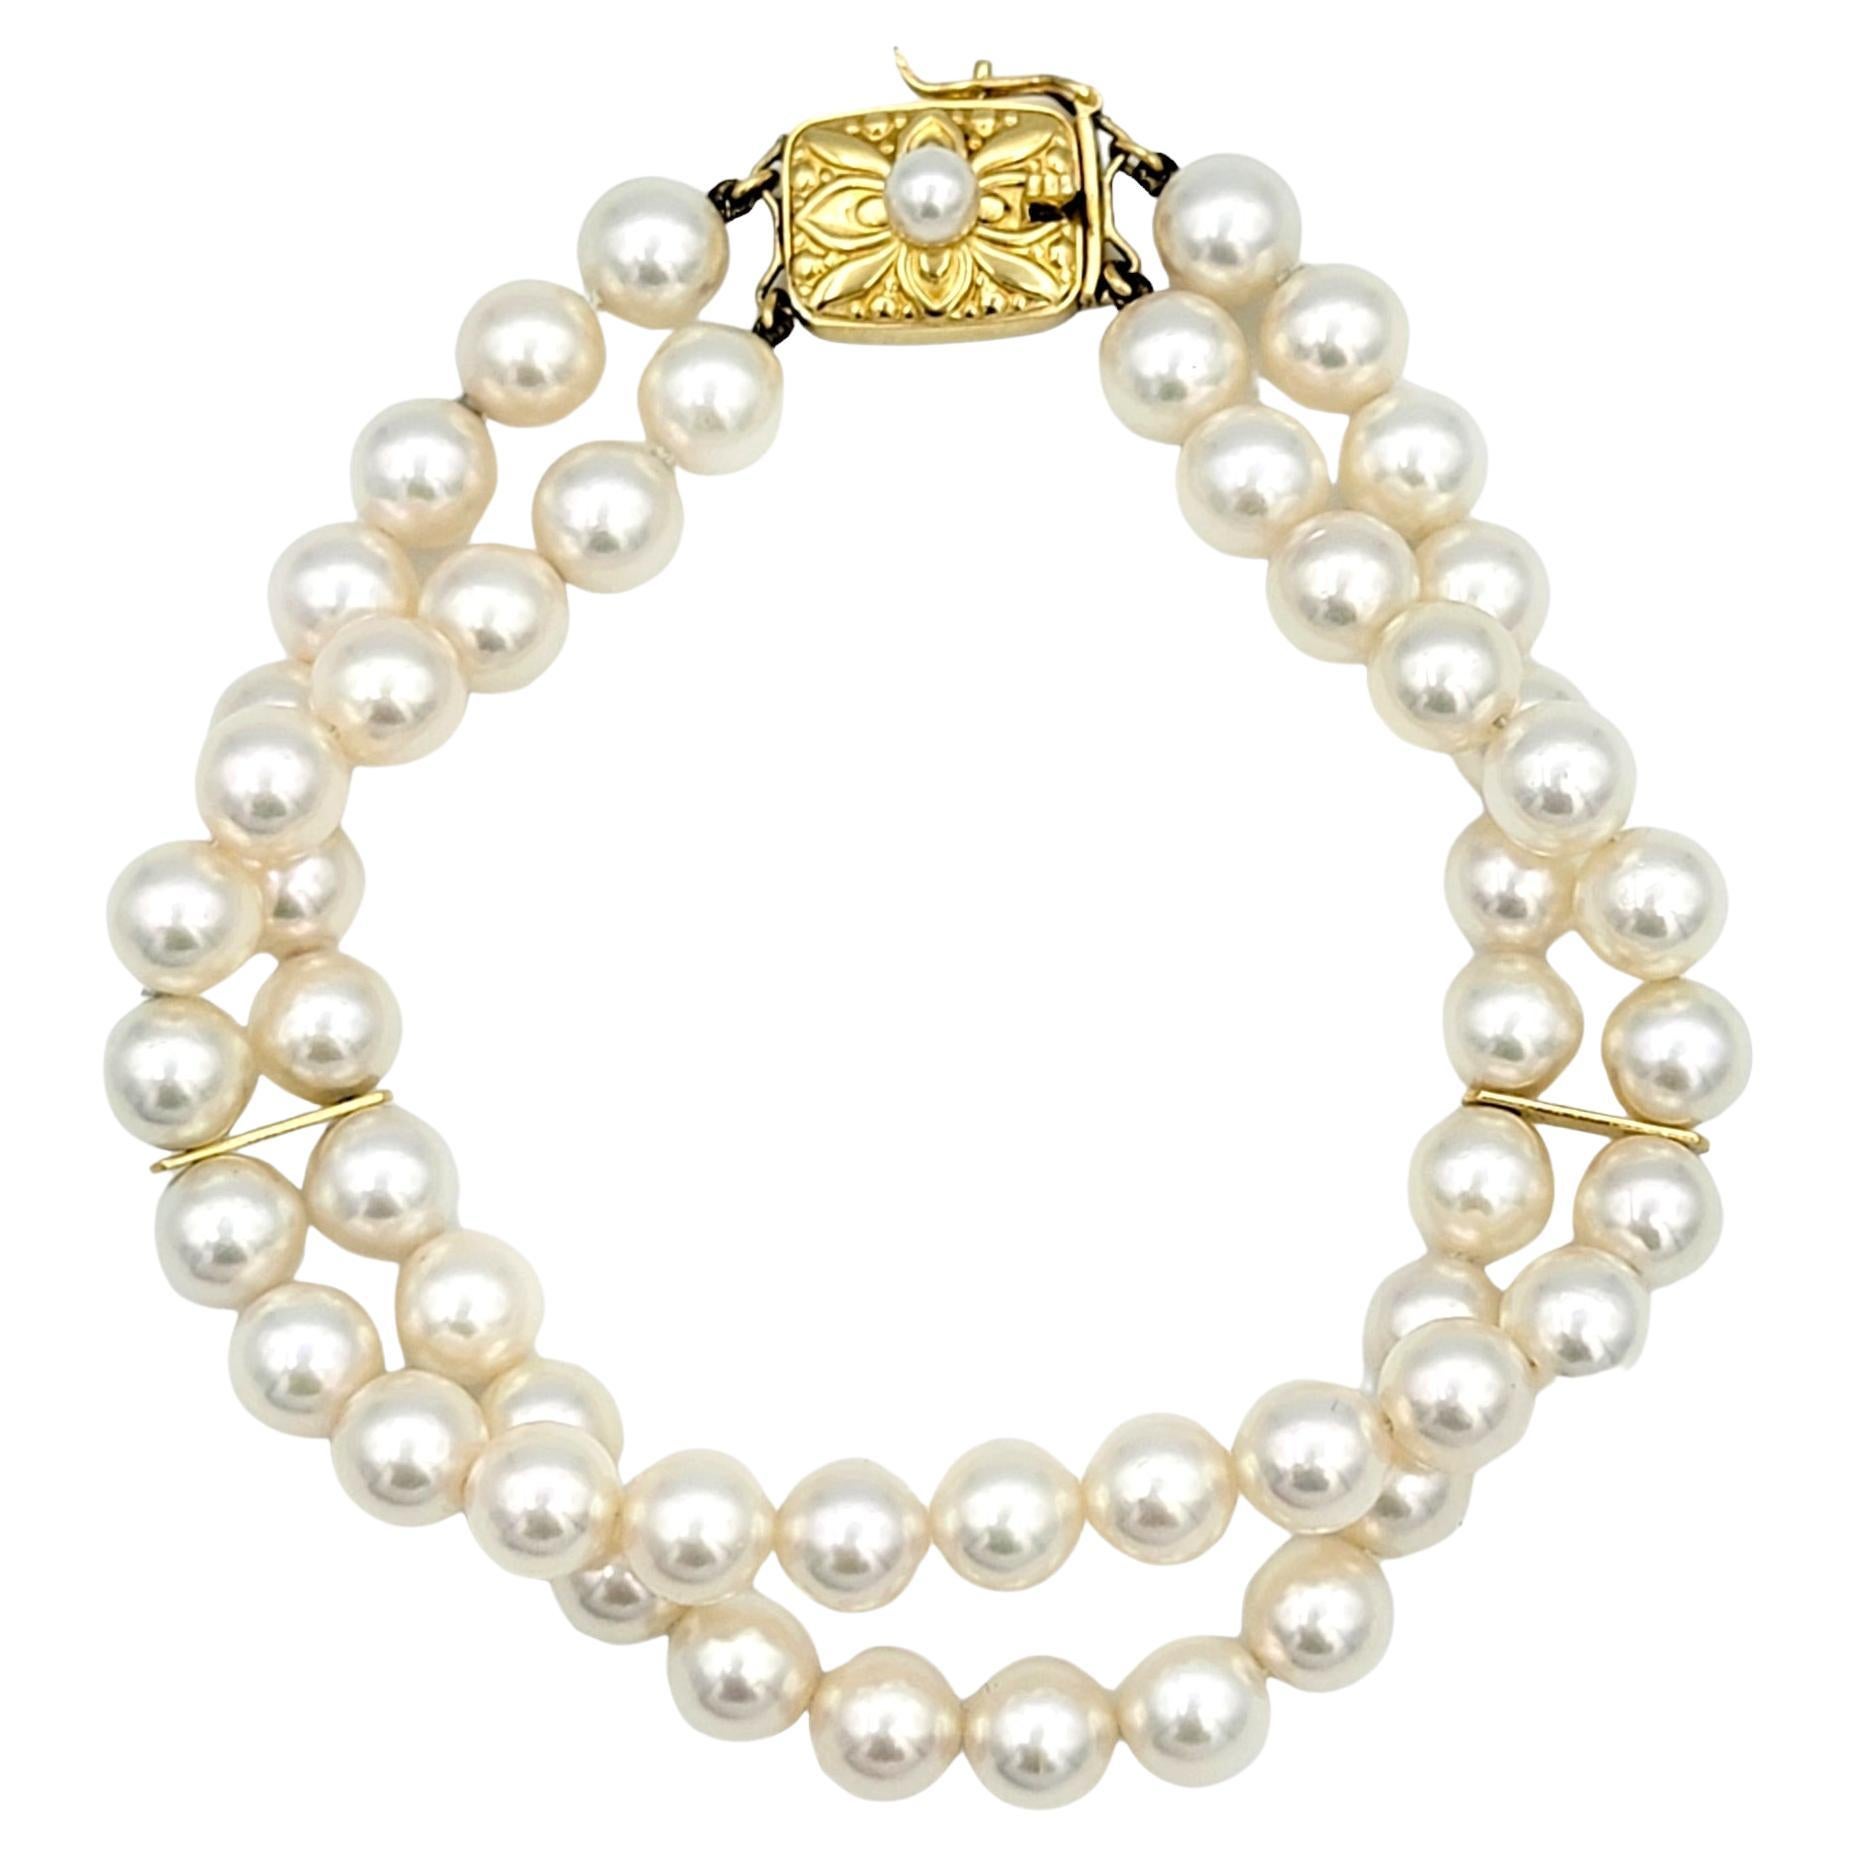 Double Strand Akoya Cultured Pearl Station Bracelet in 18 Karat Yellow Gold